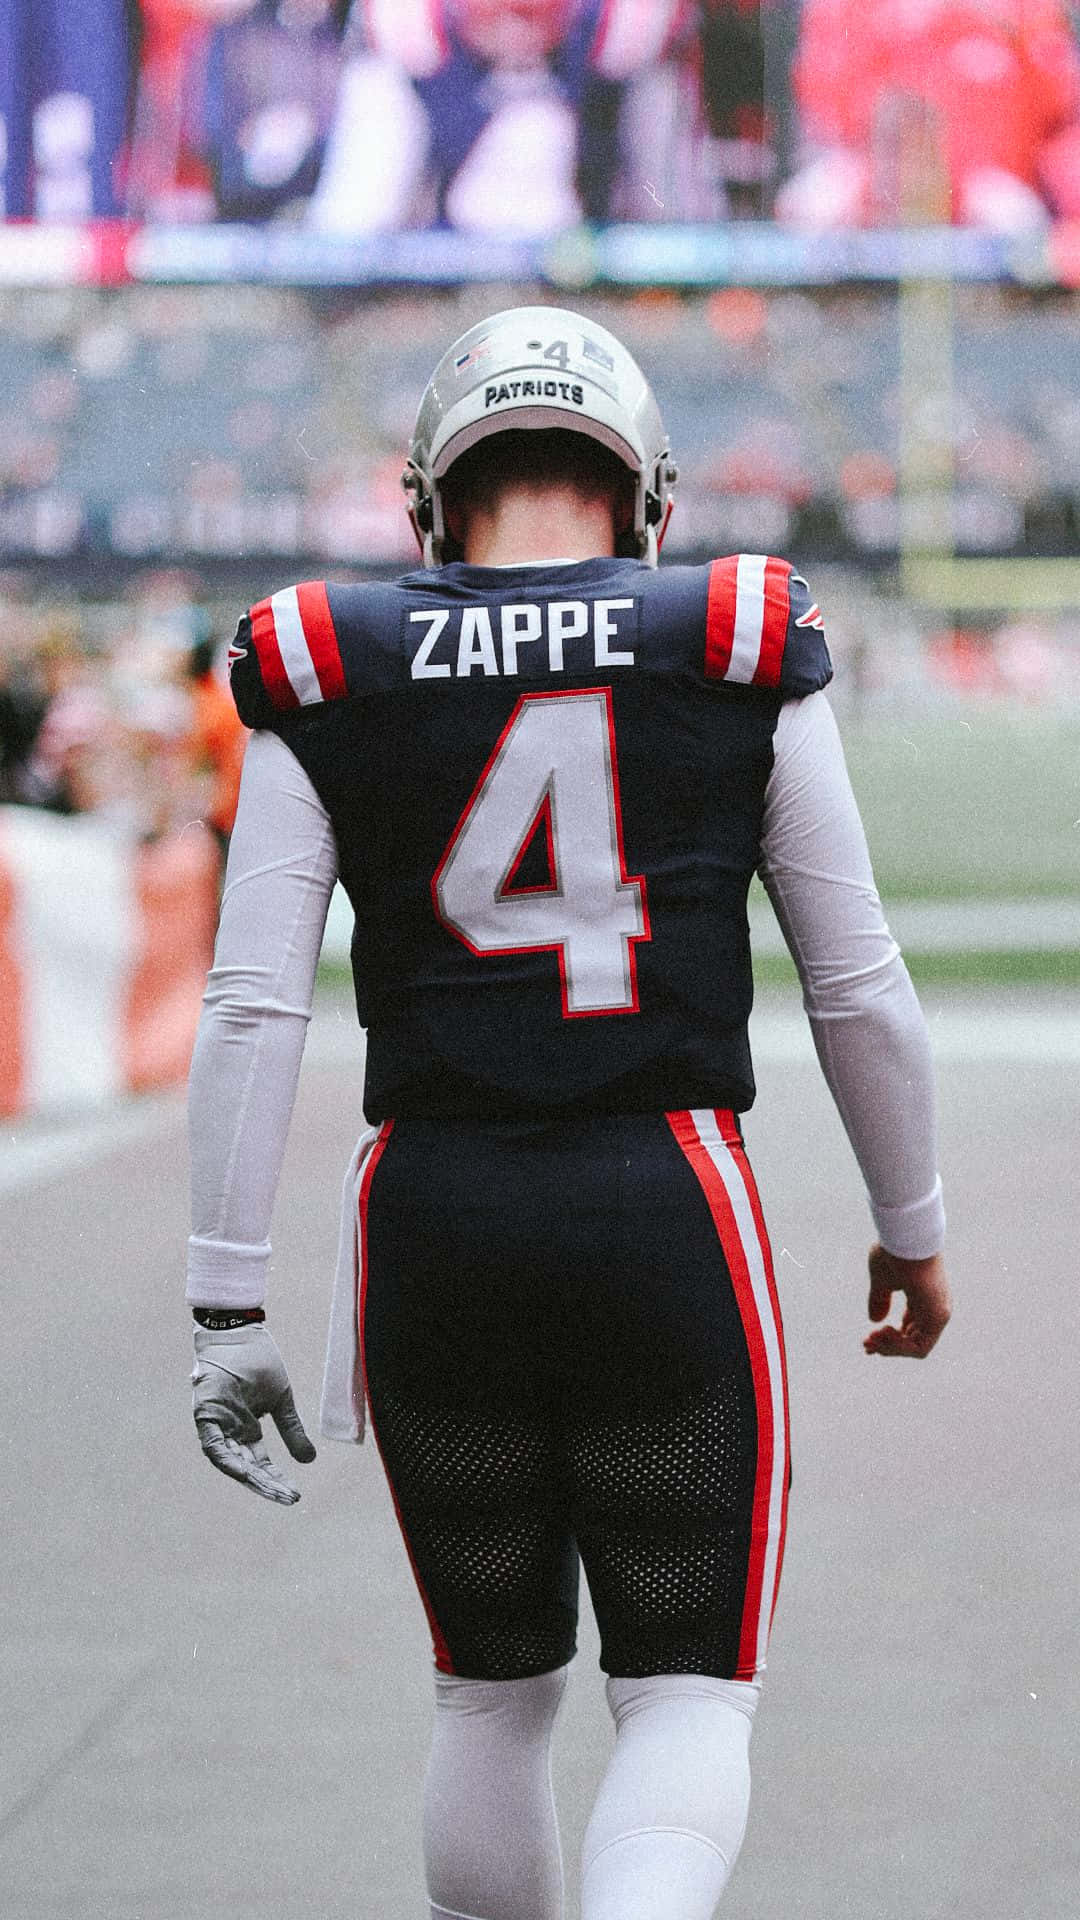 Football Player Number4 Zappe Wallpaper